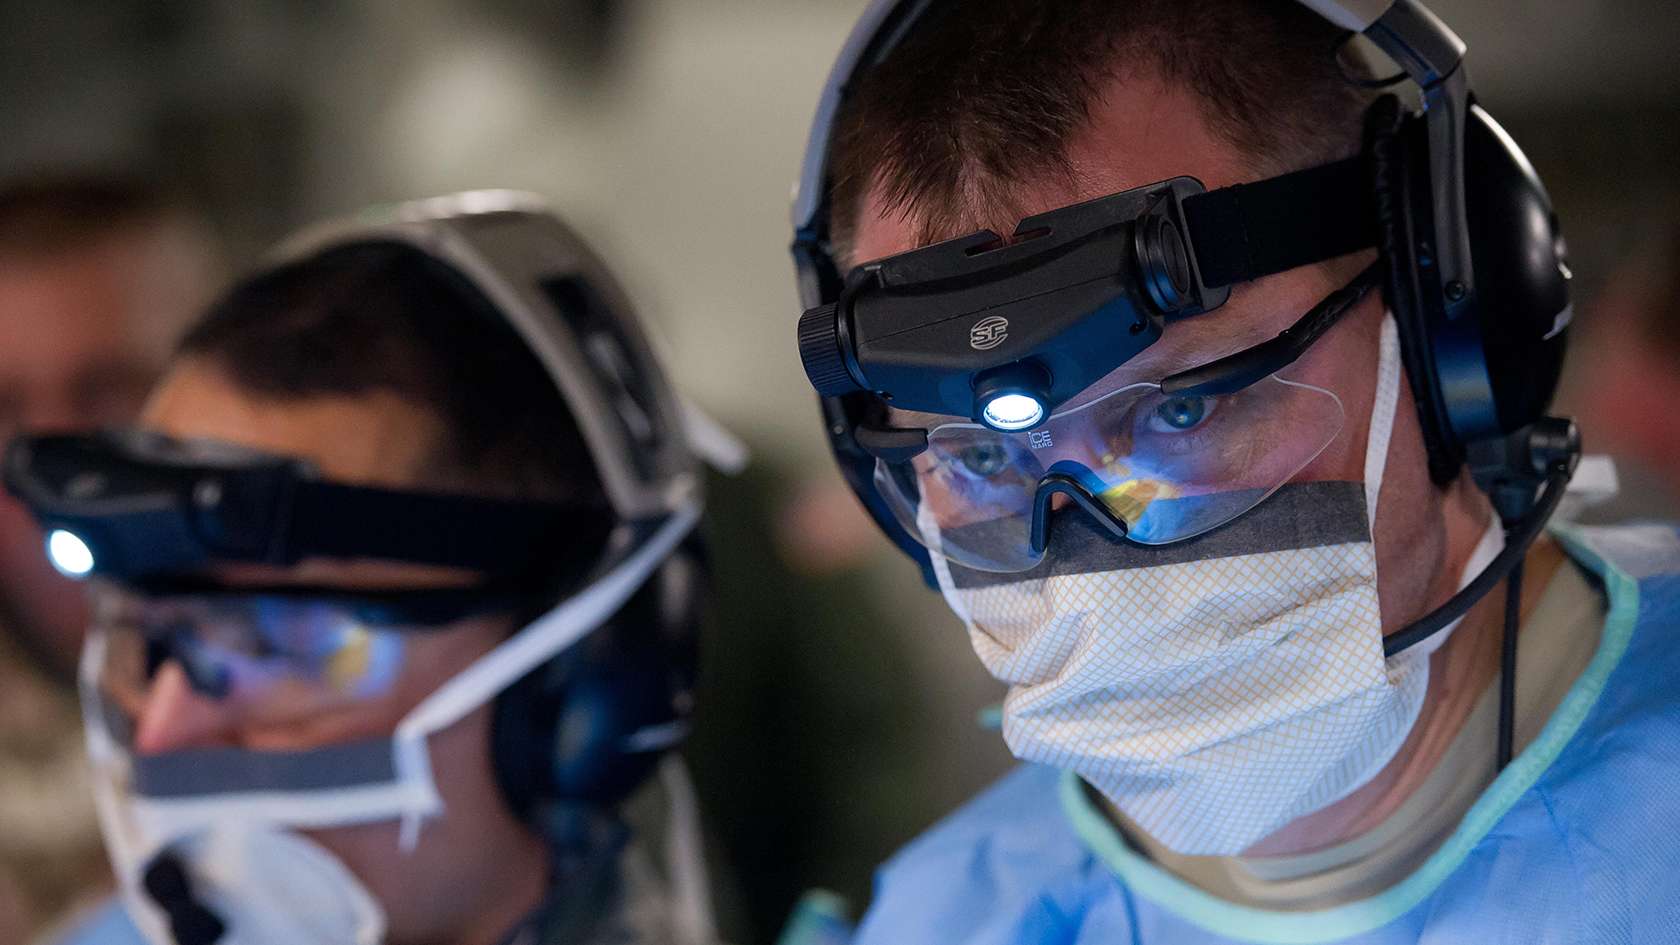 surgeon's face wearing protective eye gear and mask